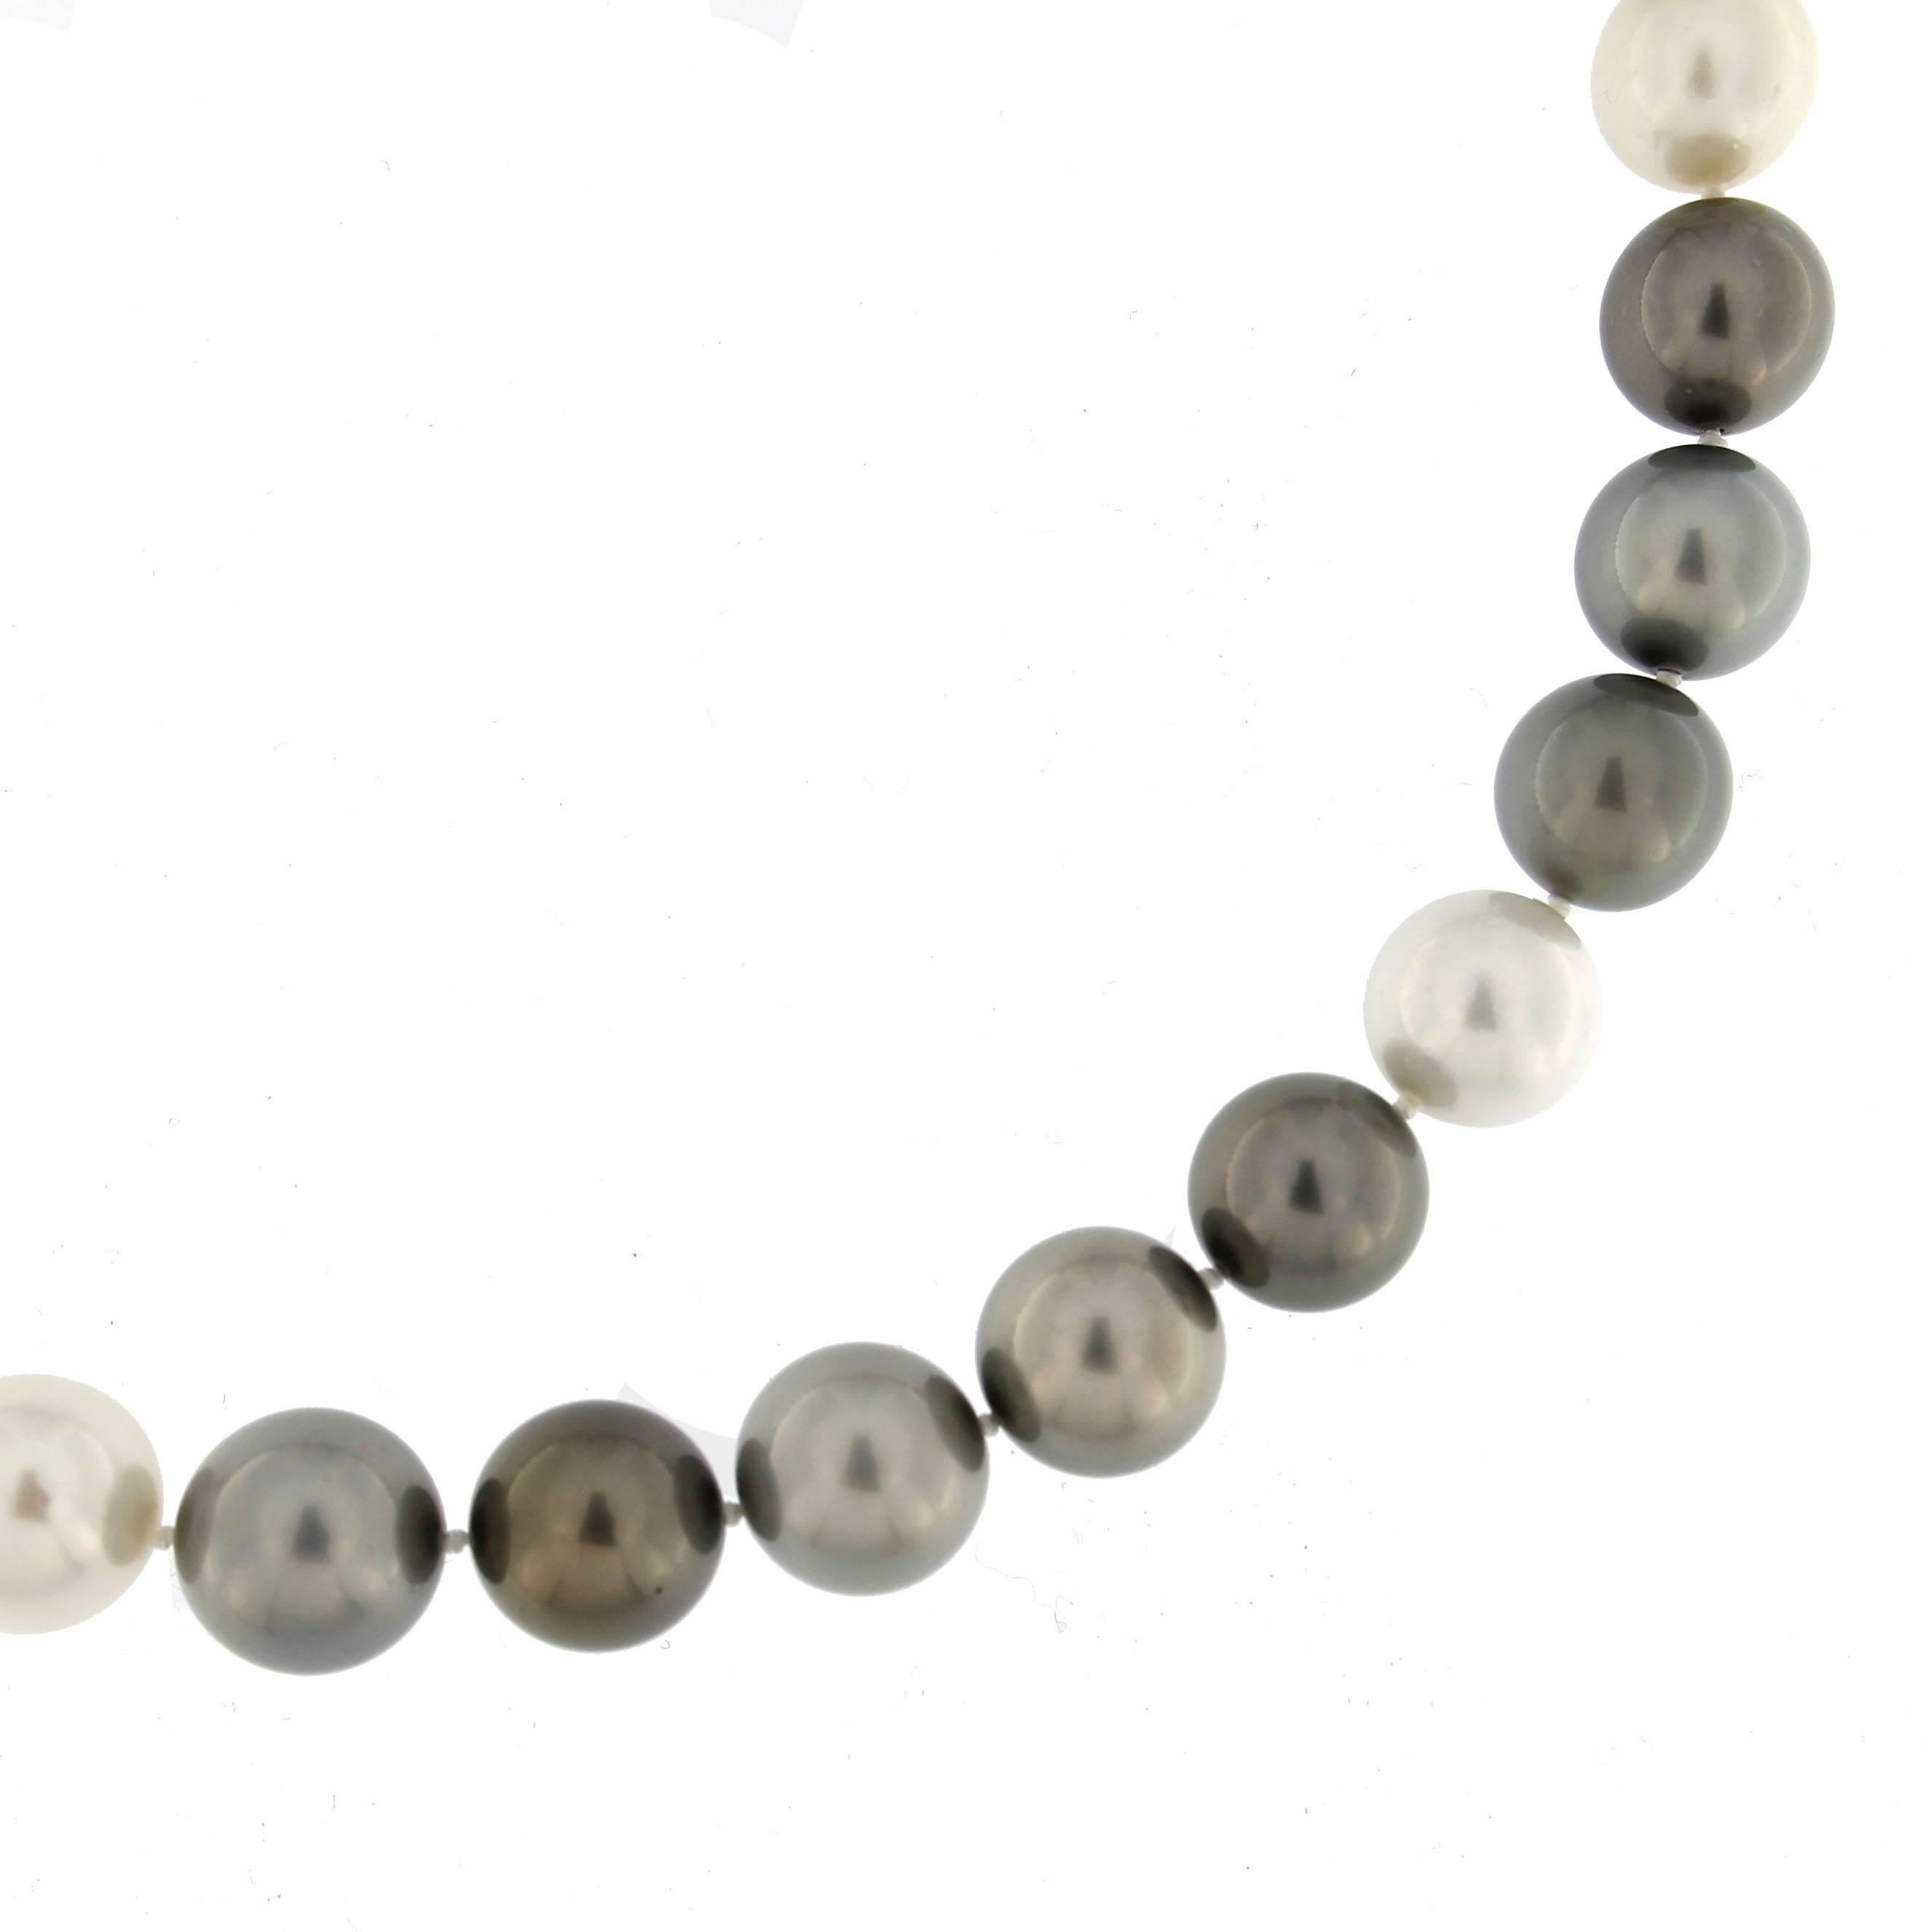 Jona collection, seventeen inch long necklace consisting of thirty three, 0.47 - 0.55 in.(11.9-13.9 mm ), white, light grey and black South Sea pearls, the pearls are strung with an invisible clasps .

Pearl Quality: AA
Pearl Luster: AA
The Origin